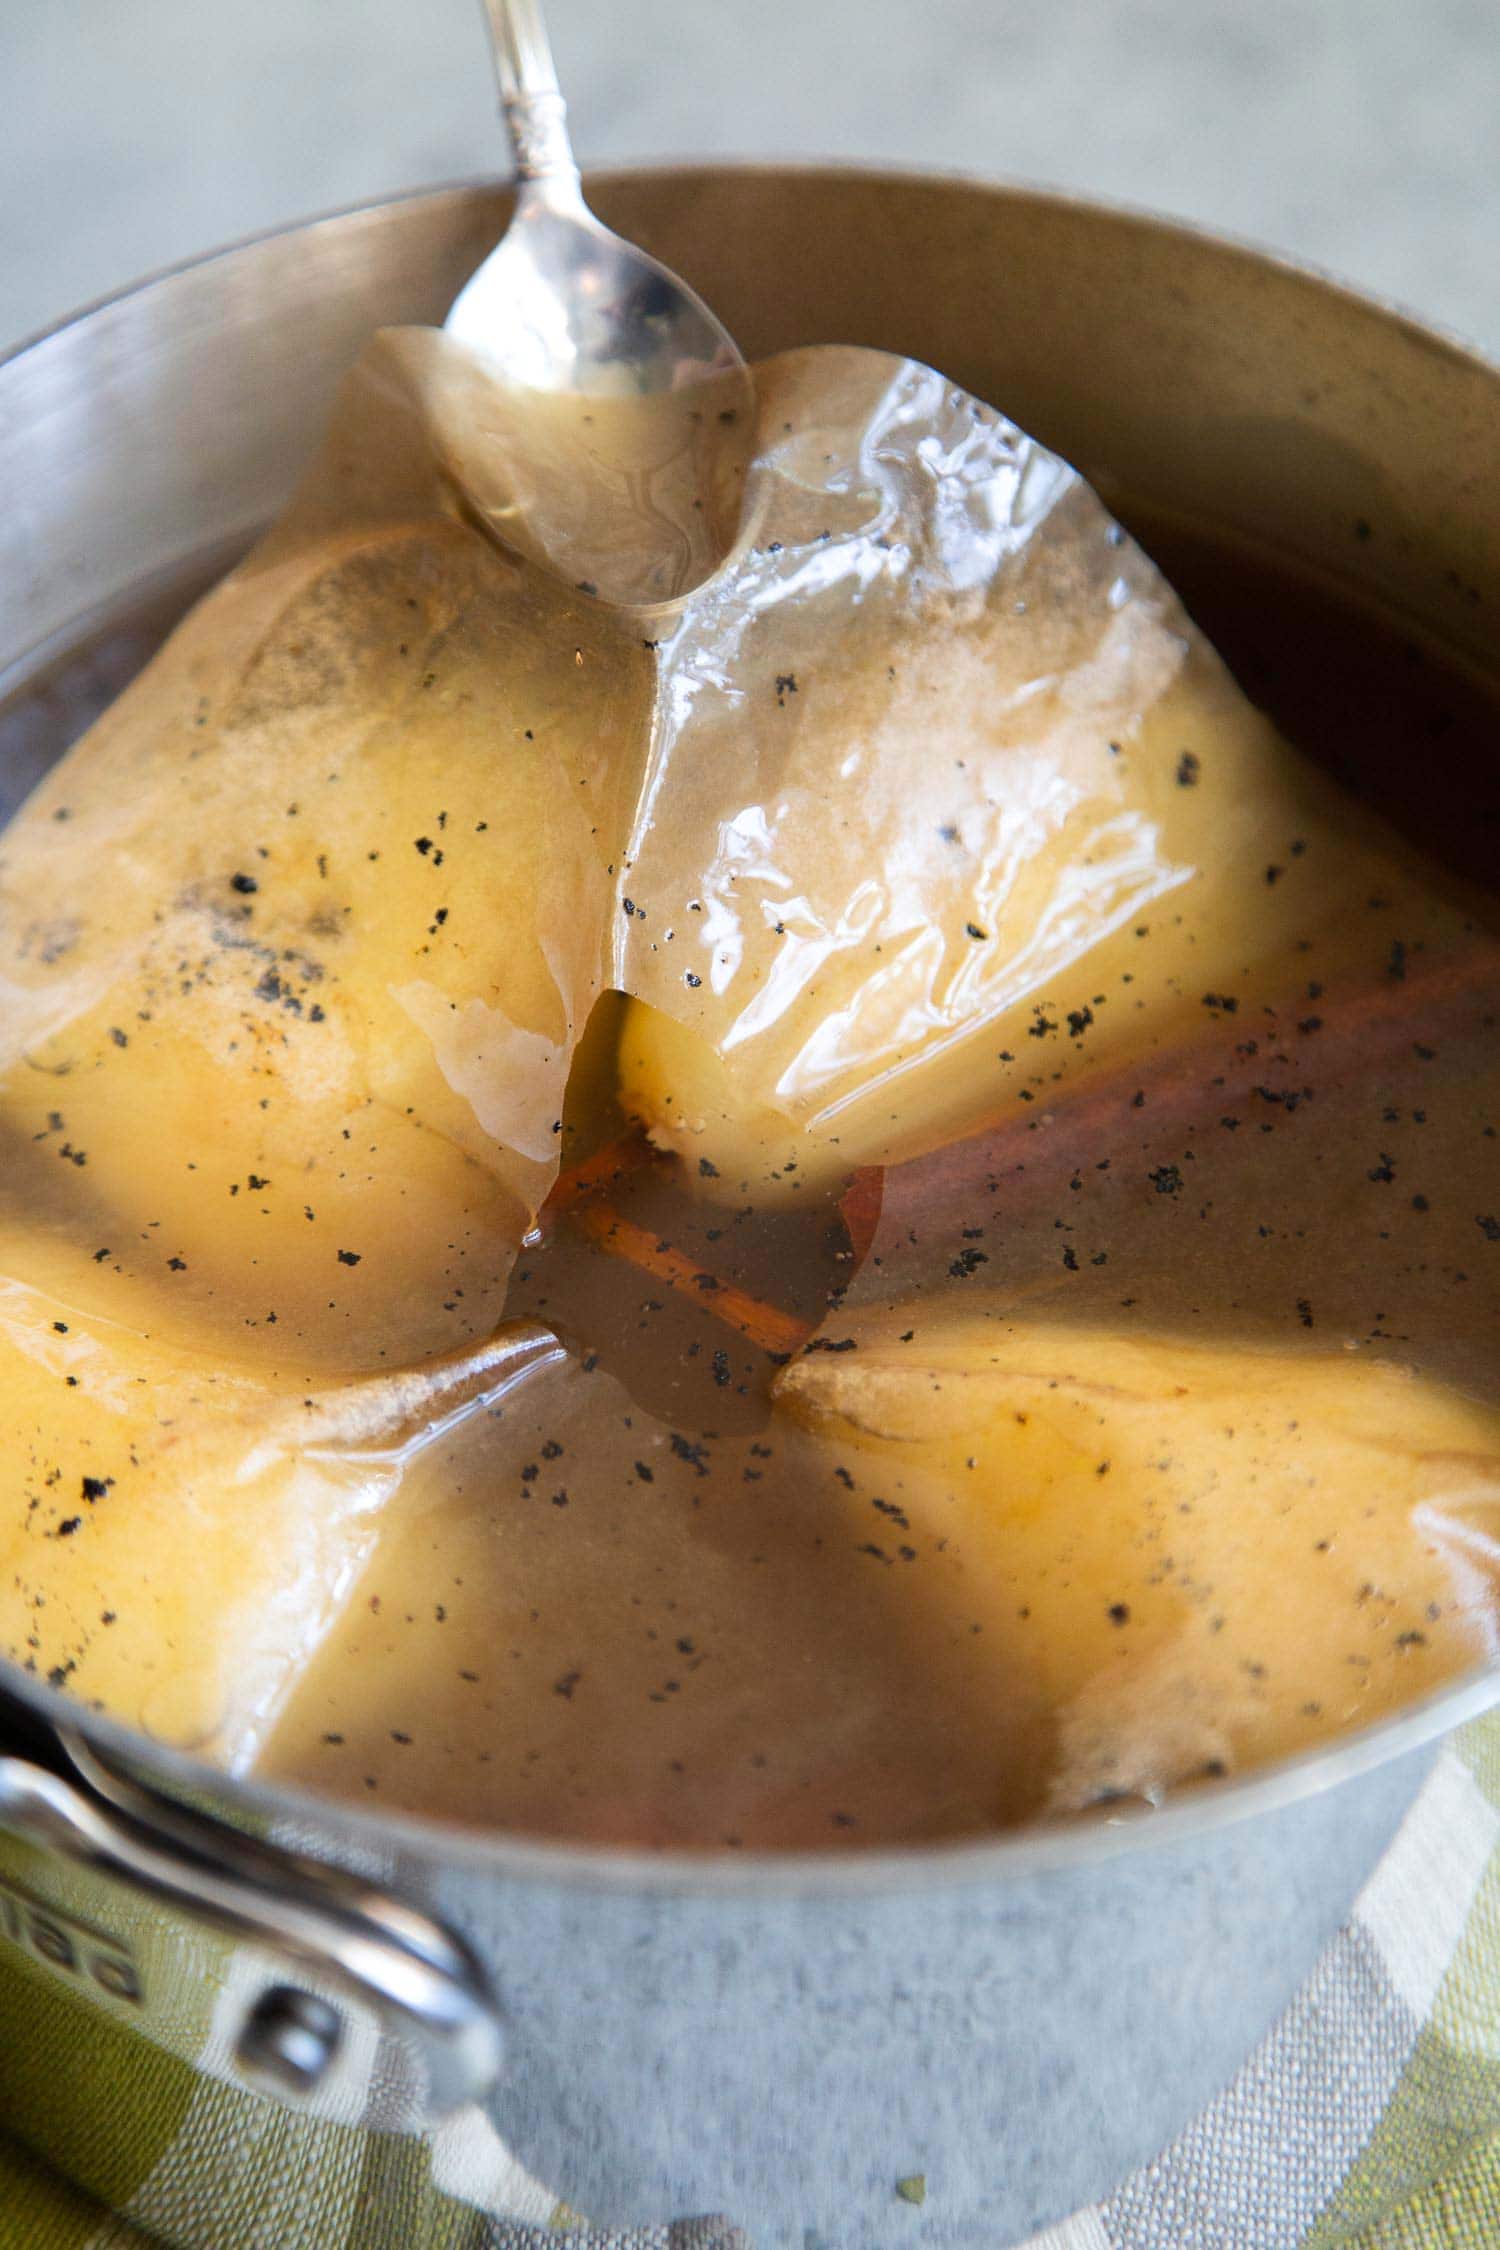 Use a cartouche to cover poached pears during simmering. Blog post explains this easy trick!